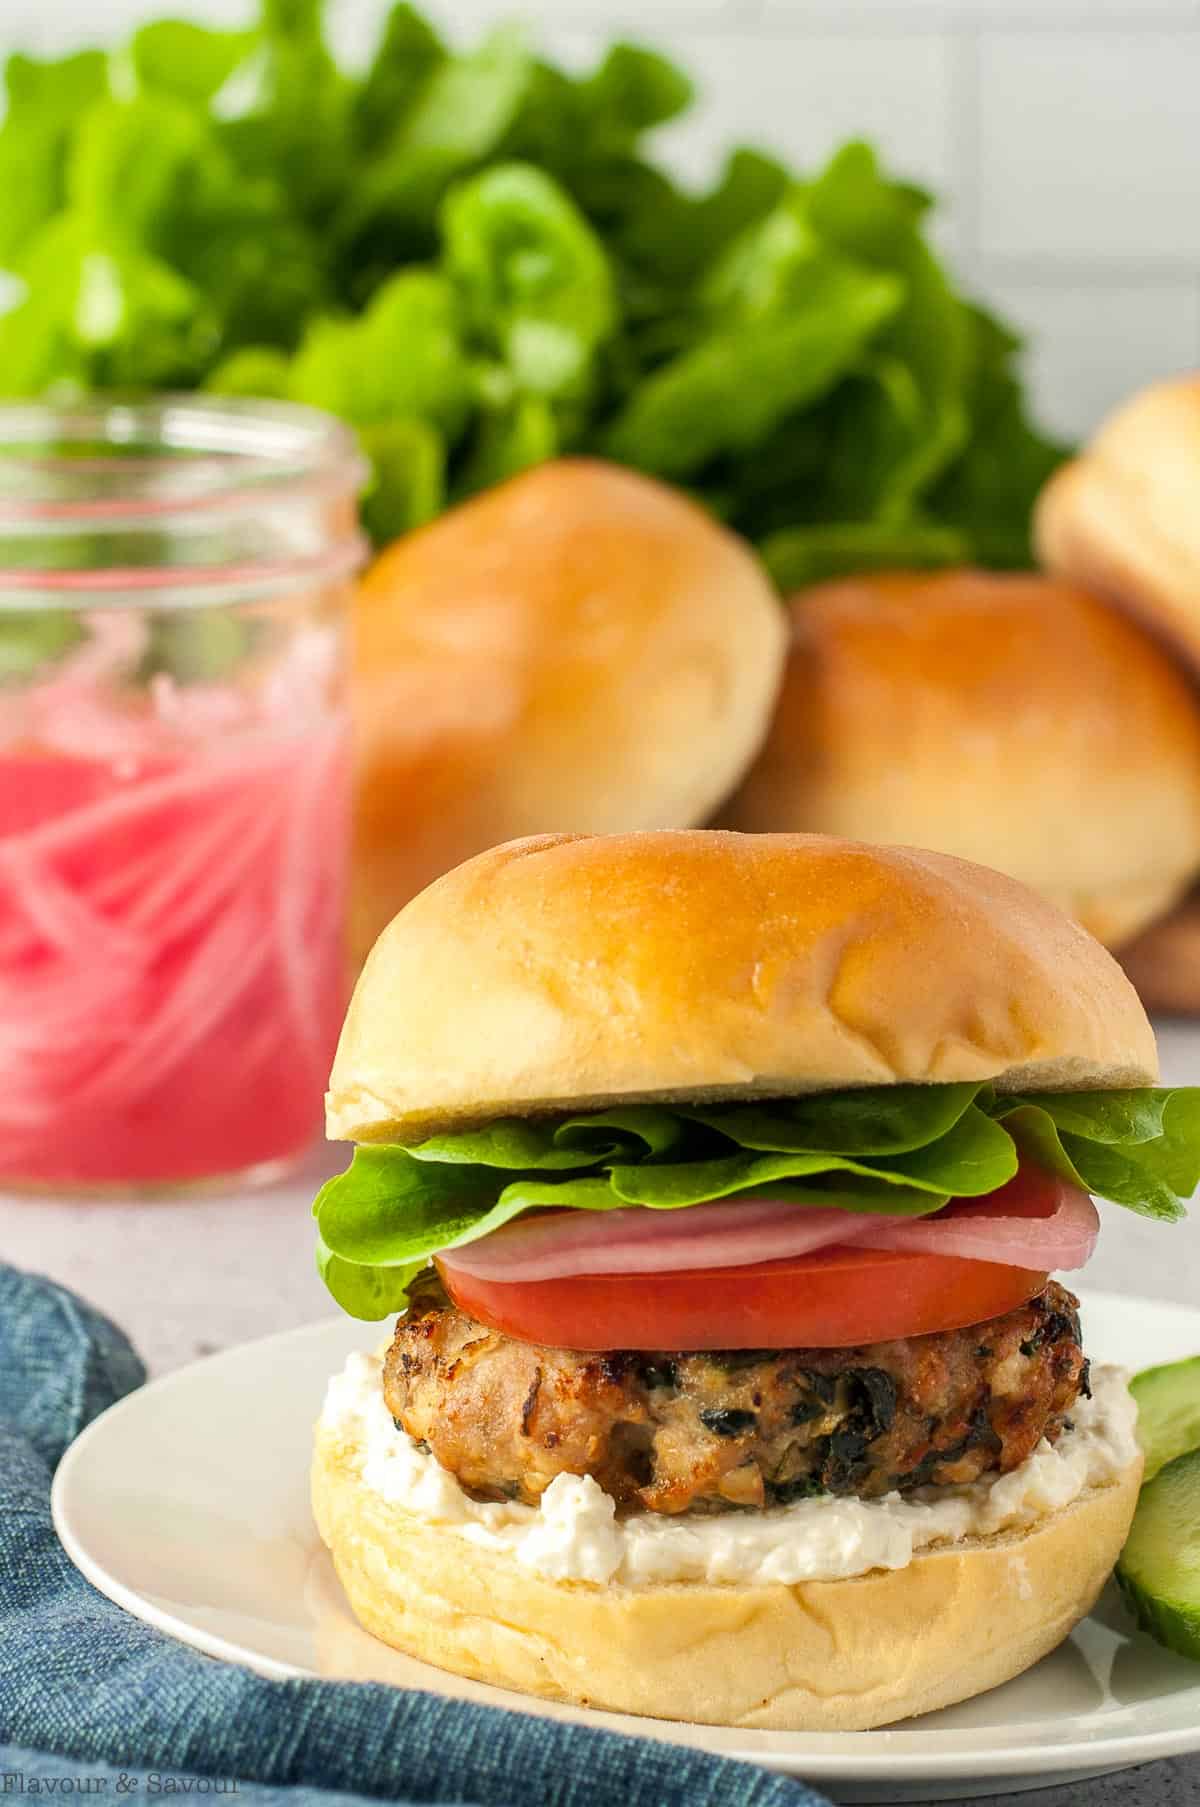 A Greek Chicken Burger made with Feta and Spinach on a bun.